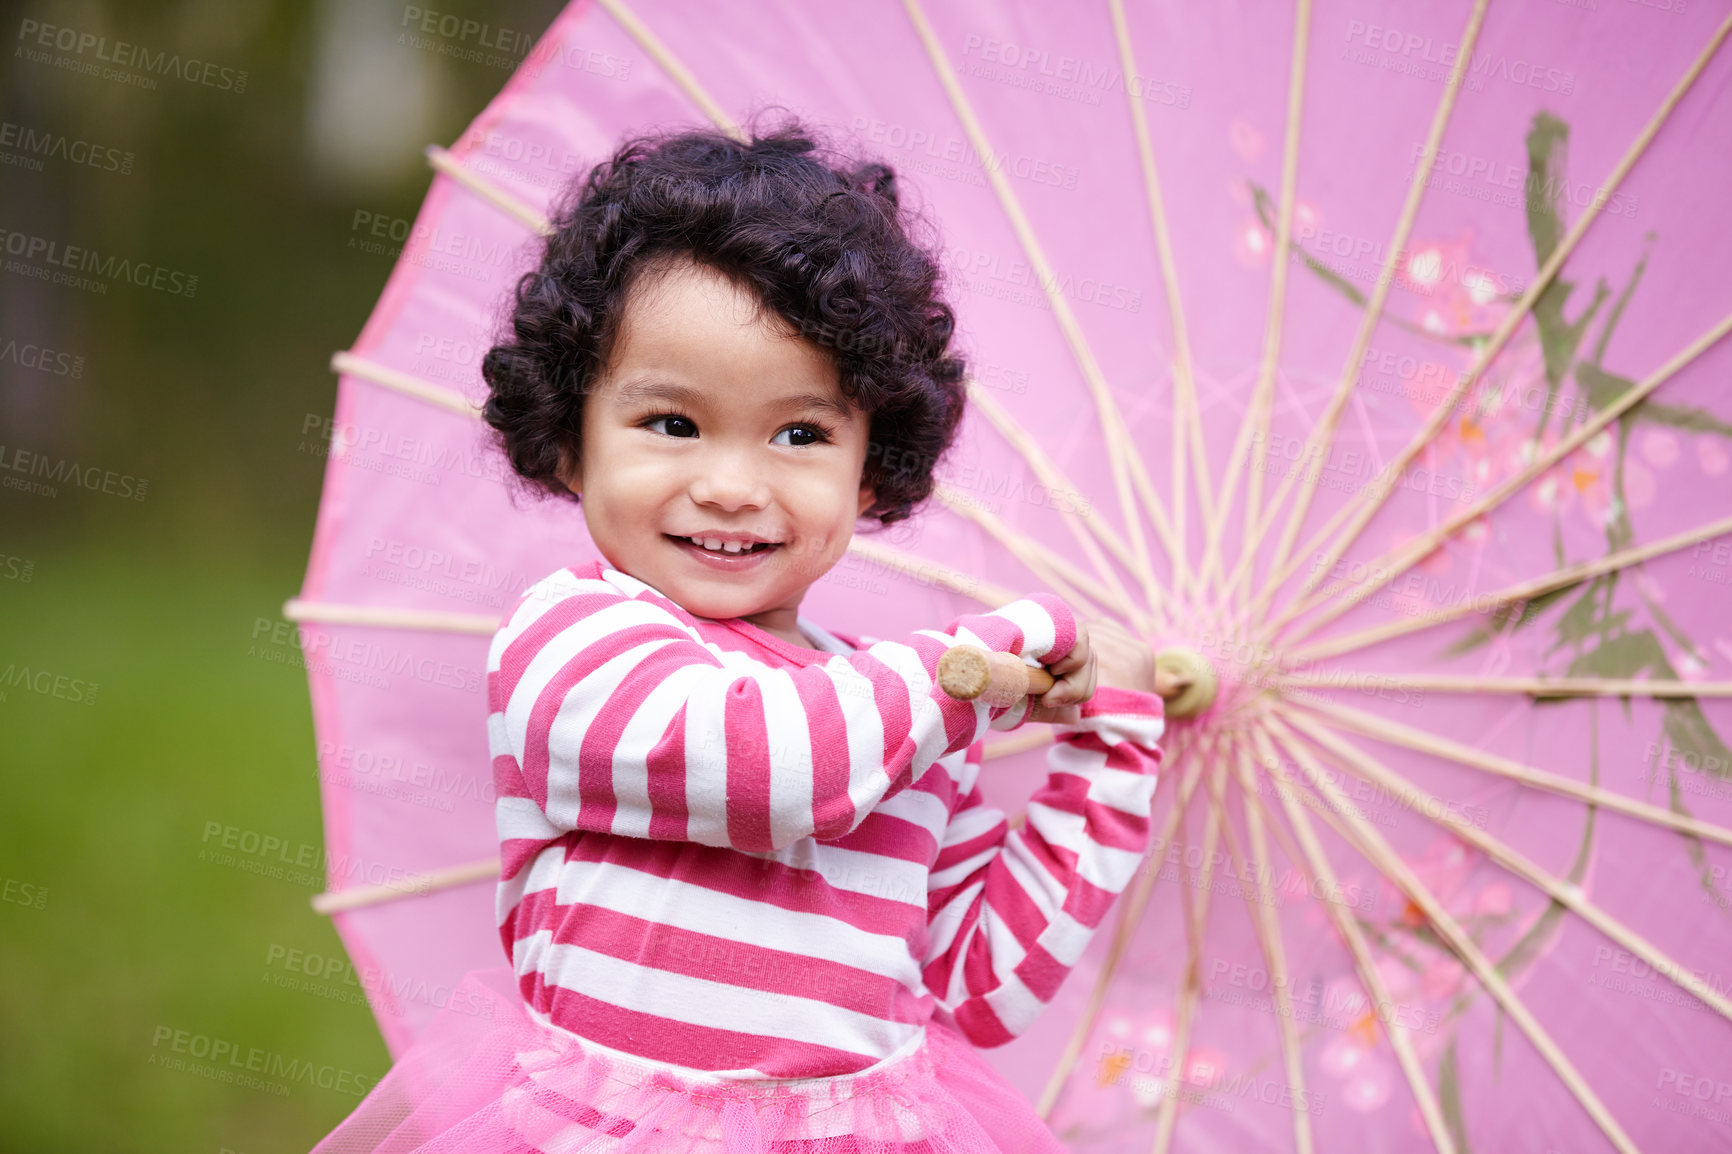 Buy stock photo Umbrella, happy and girl child in a garden walking on the grass on summer weekend. Adorable, playful and young kid, baby or toddler with curly hair playing on the lawn in outdoor field or park.